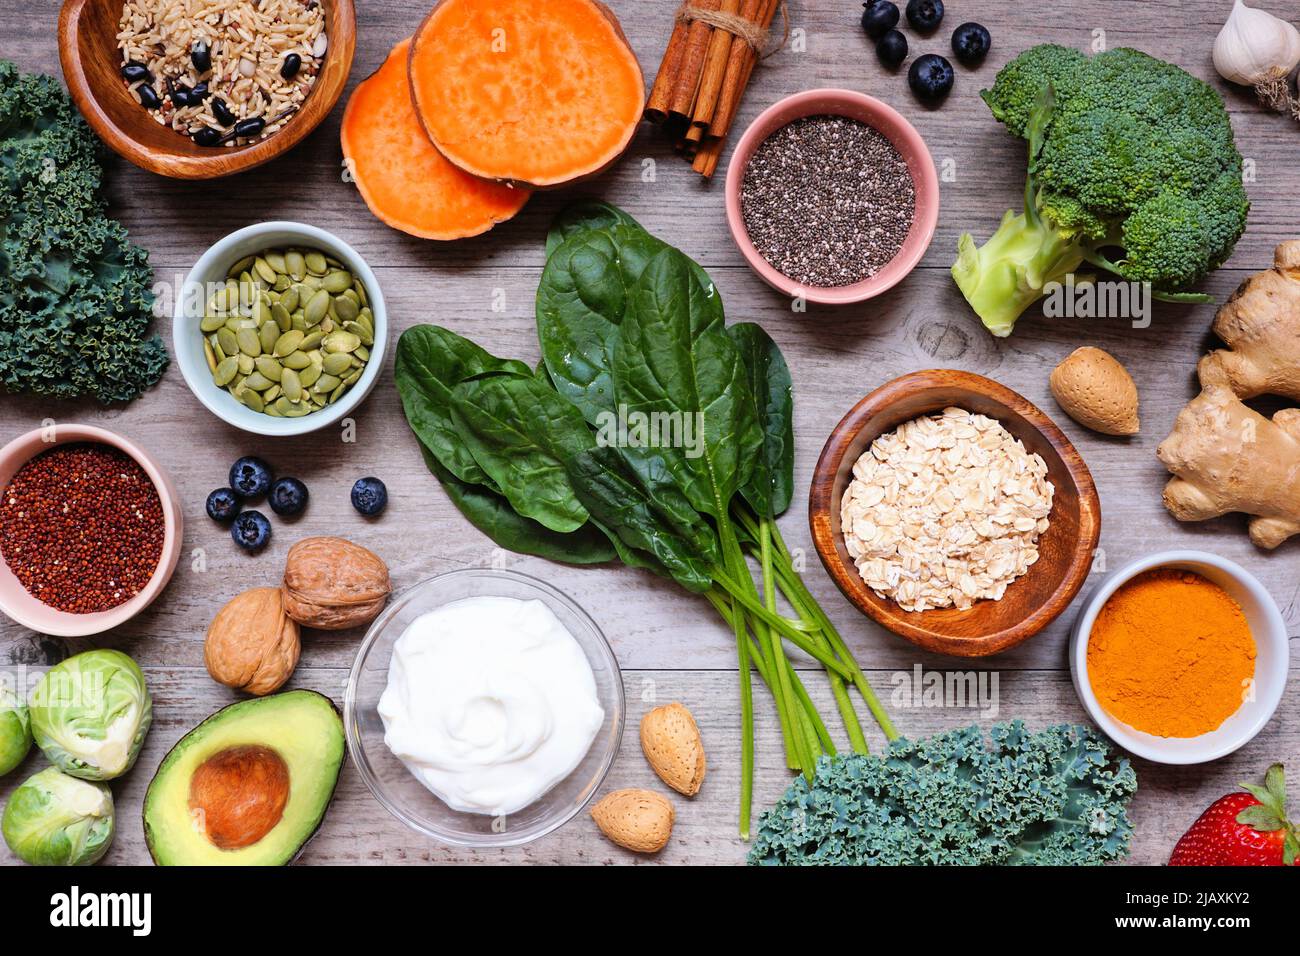 Group of healthy food ingredients. Overhead view table scene on a wooden background. Super food concept with green vegetables, berries, whole grains, Stock Photo